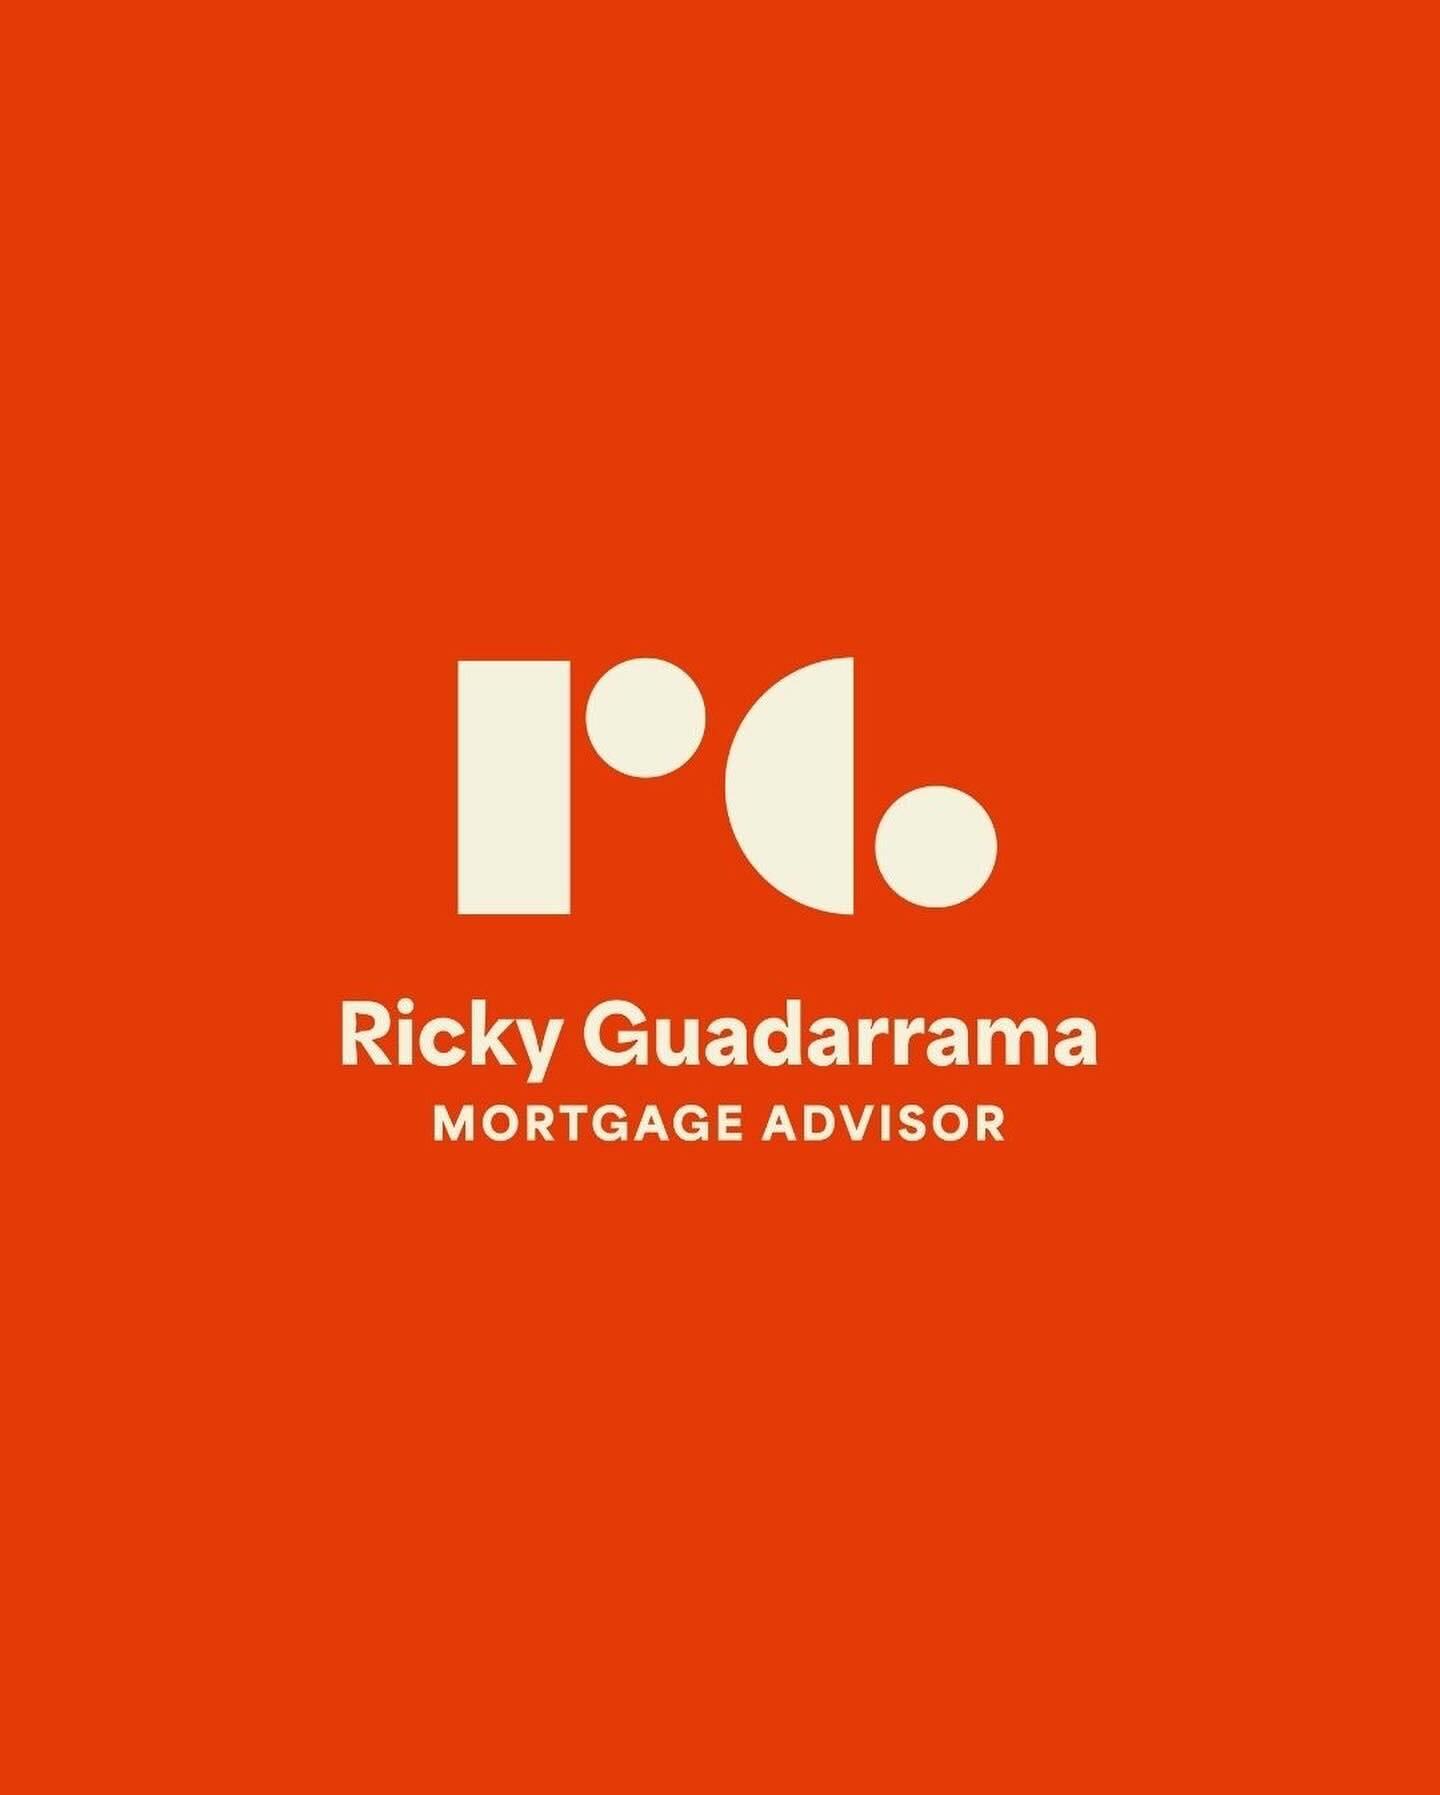 With a passion for guiding first-time investors and homebuyers, Ricky&rsquo;s identity shines through, making clients feel seen and understood with his personalized process and passionate approach. Together, we&rsquo;ve built a brand that puts people